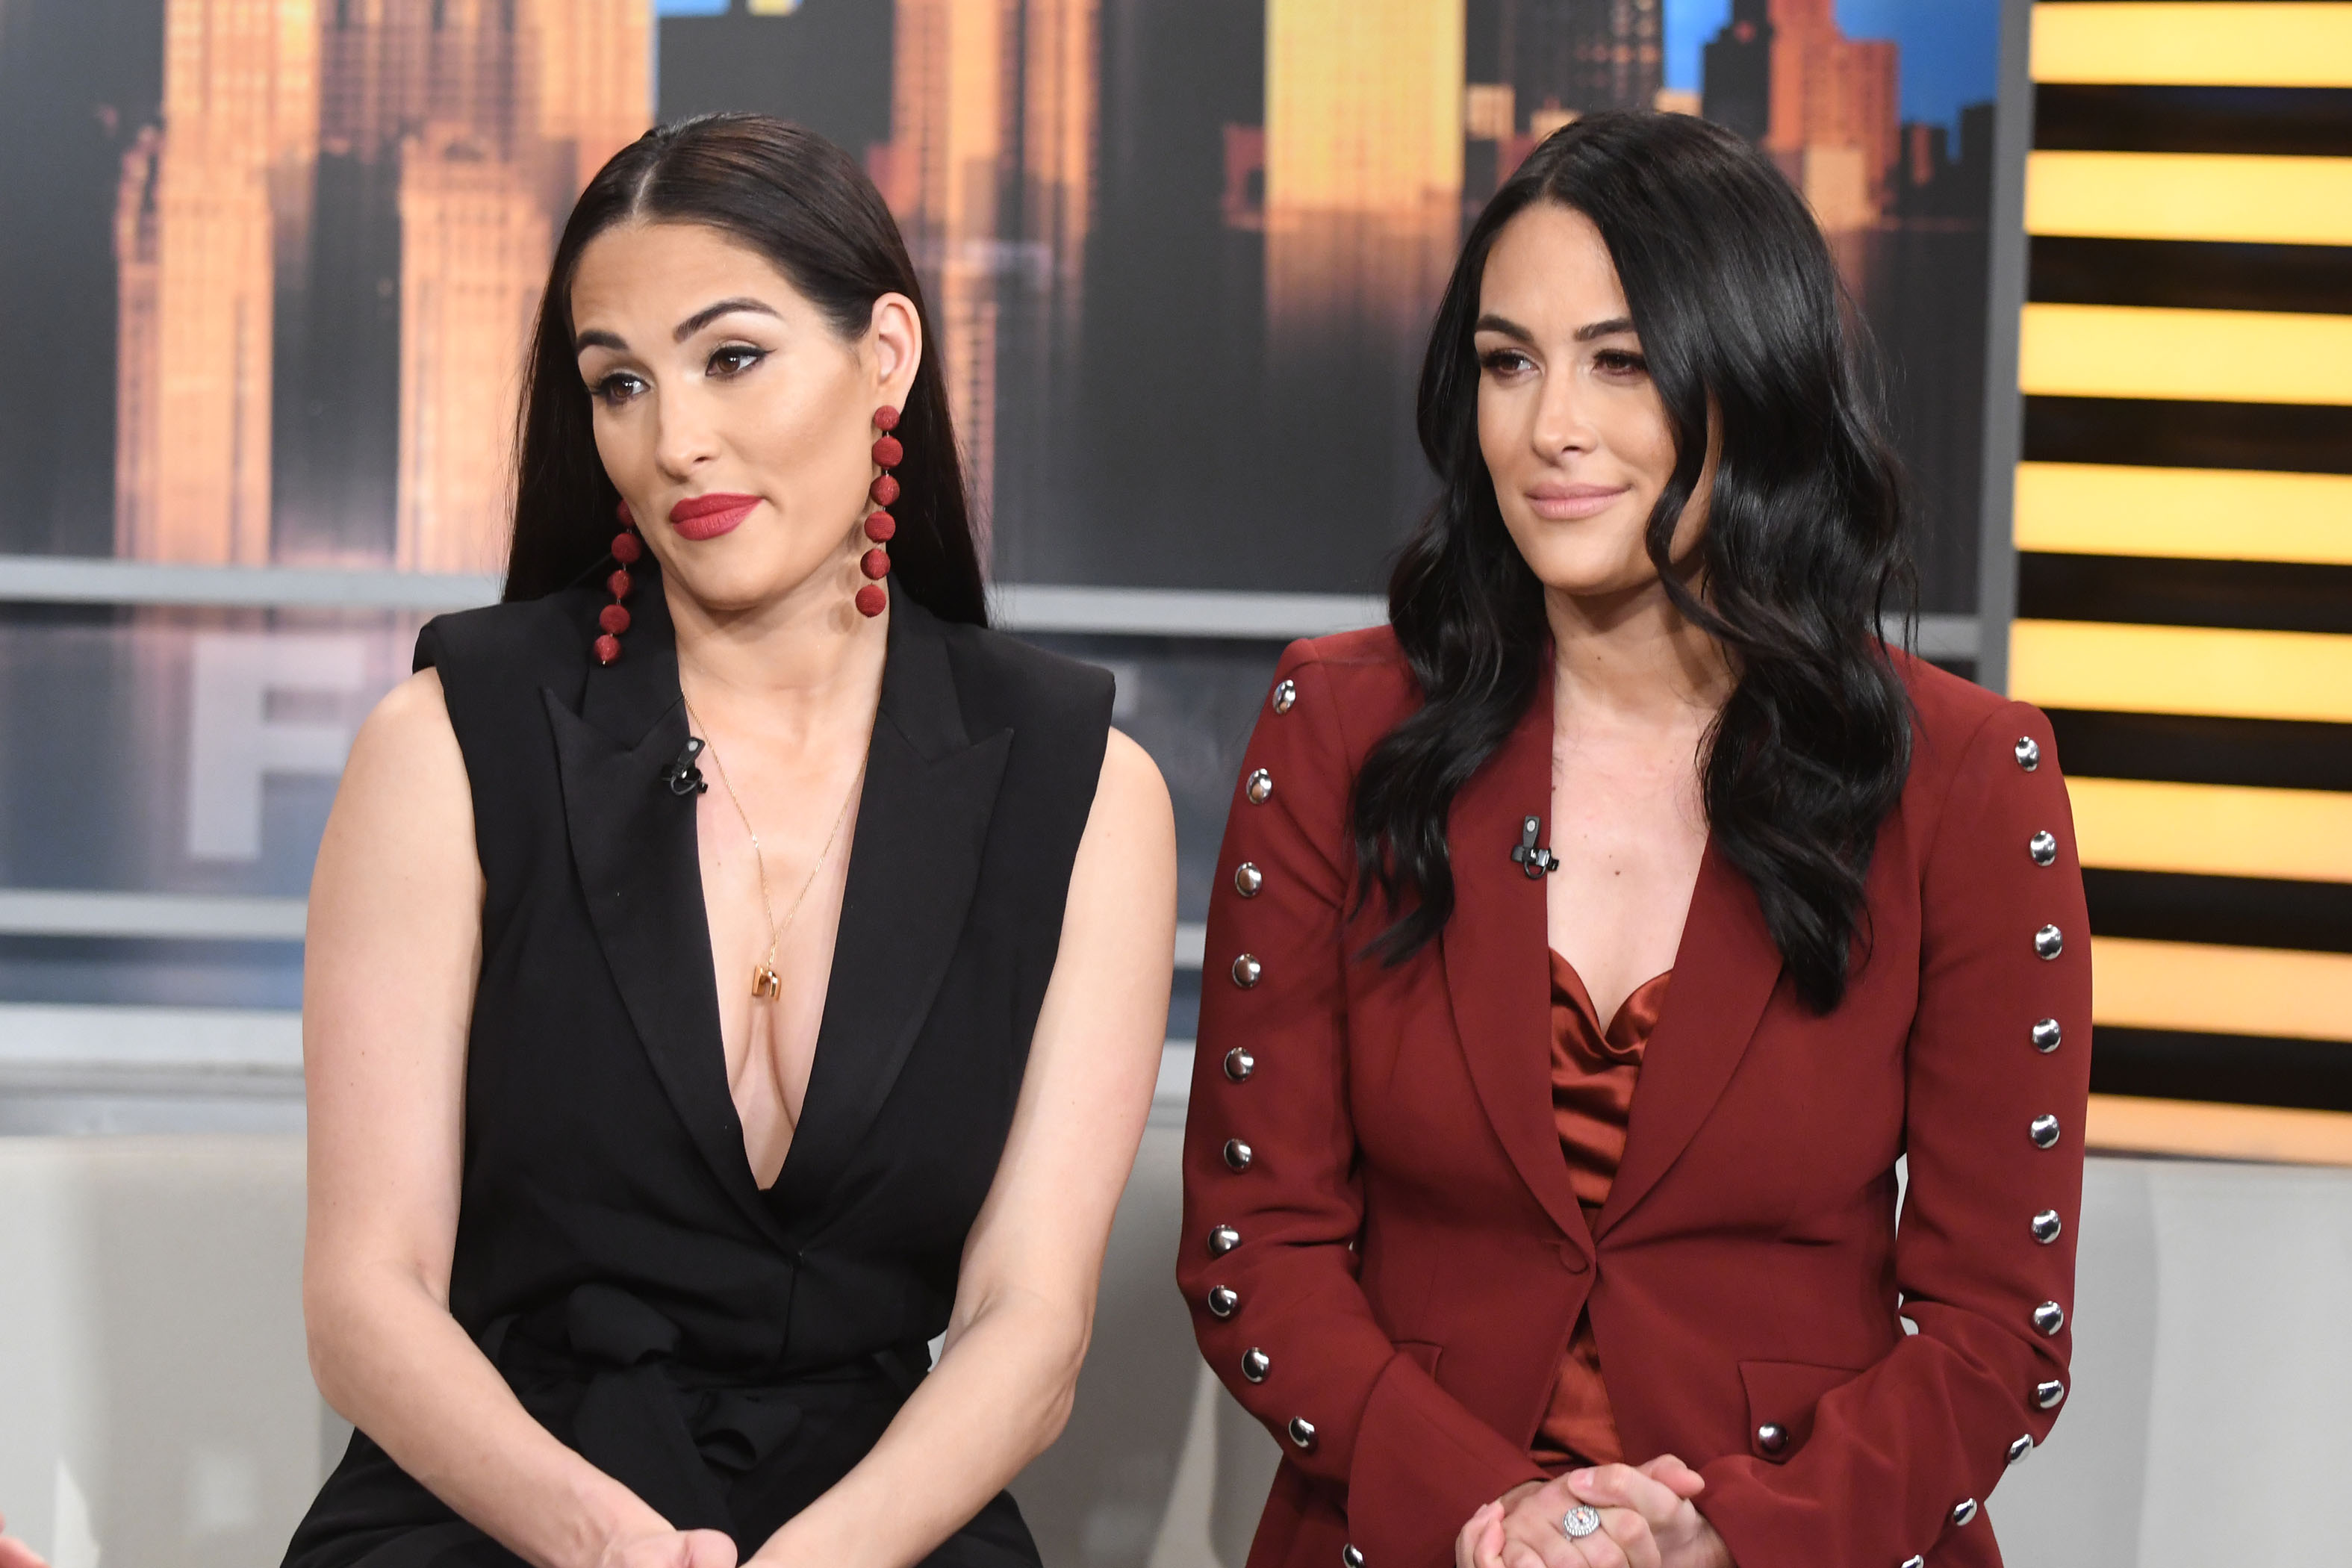 The Bella Twins Take NYC: See Pics of Their Fashionable Outfits!